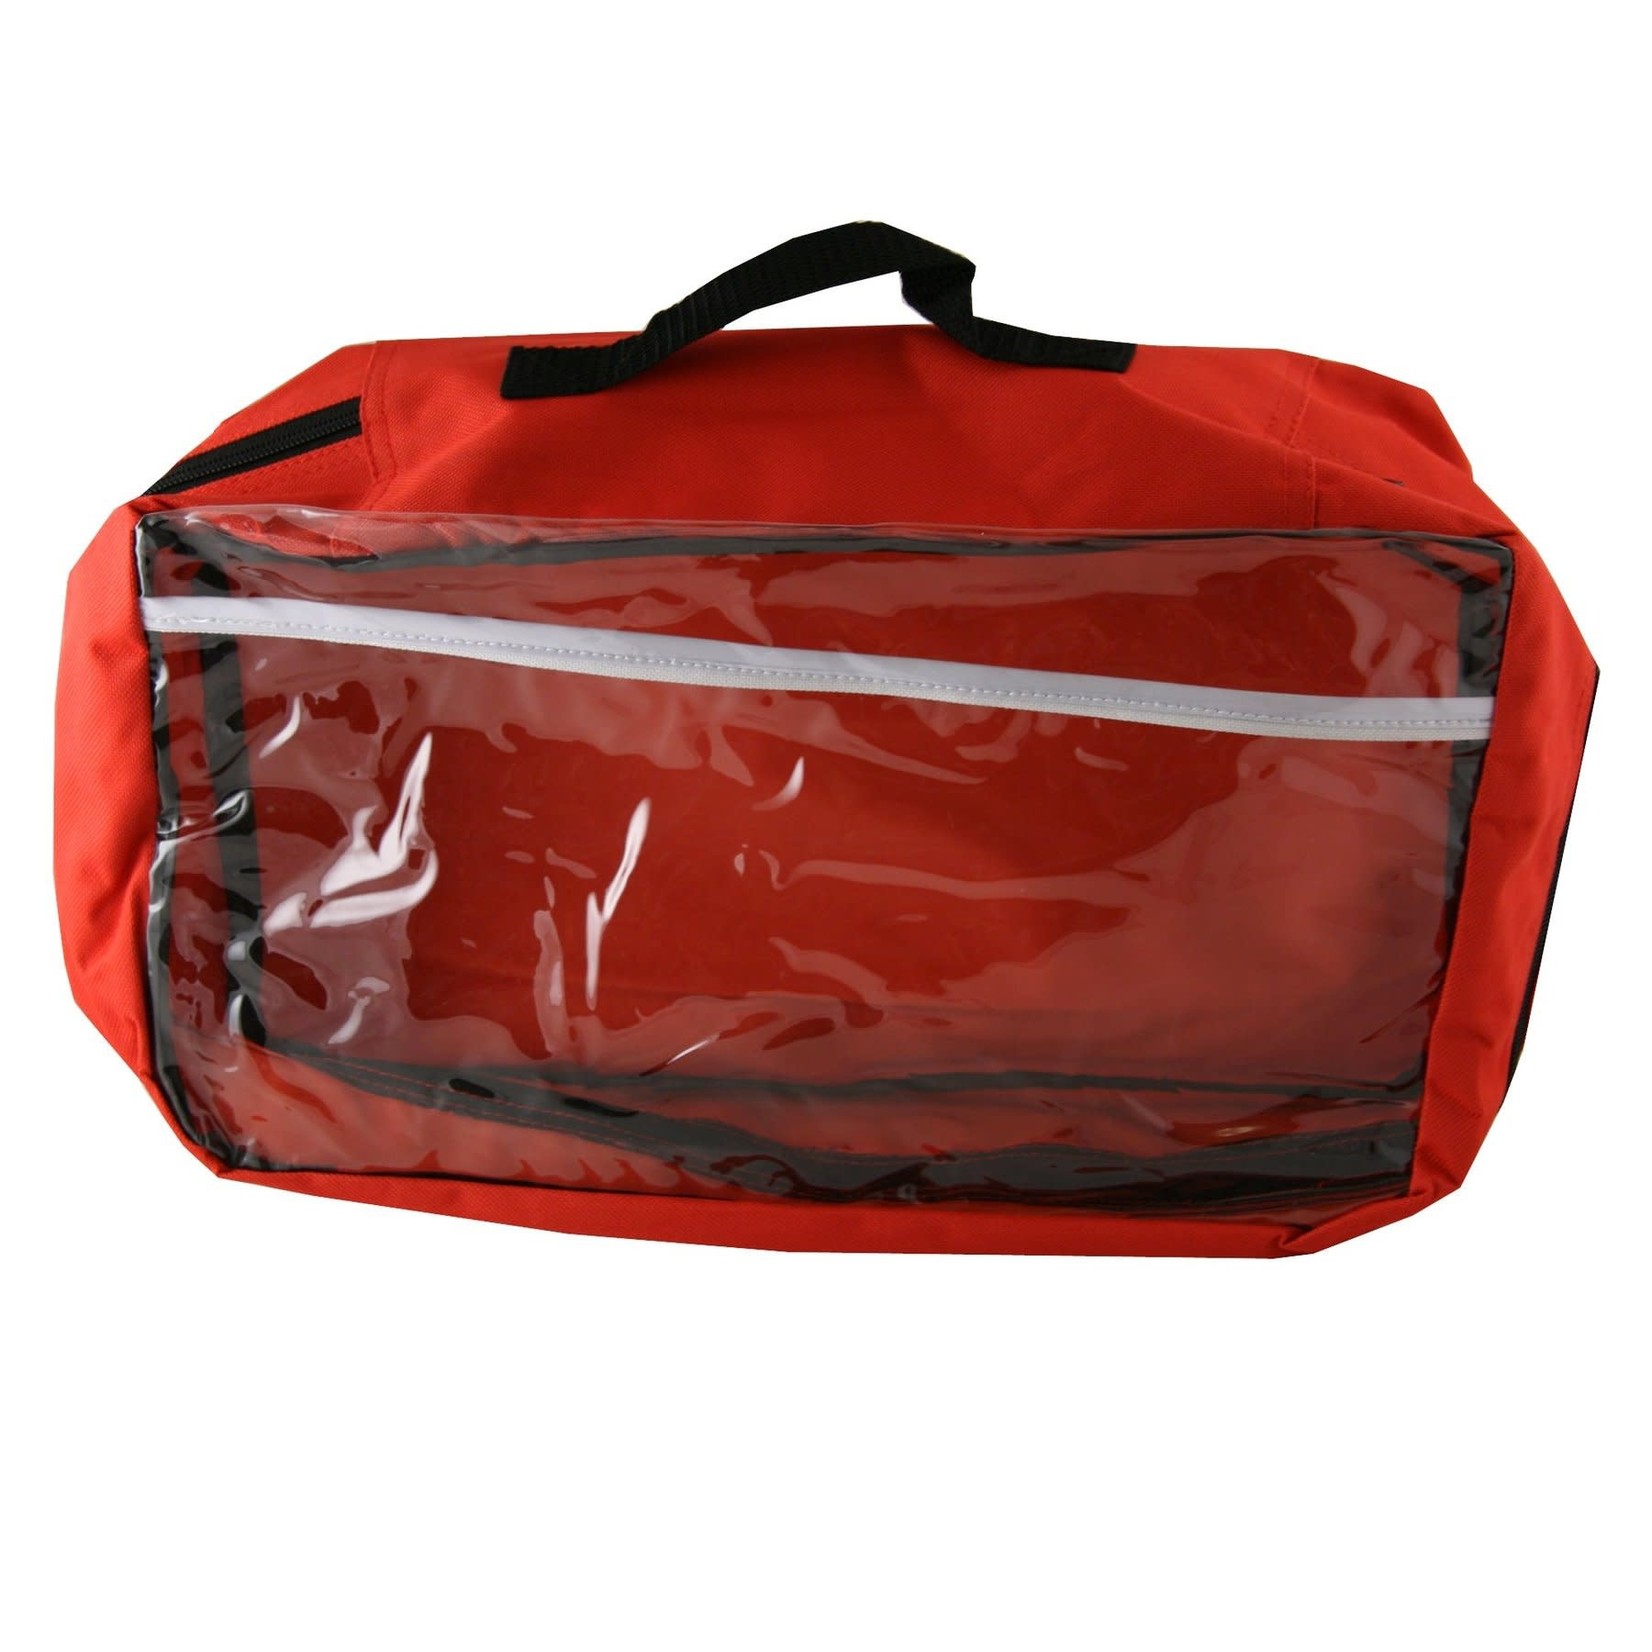 Emergency Zone EZ-See Large Red Pouch